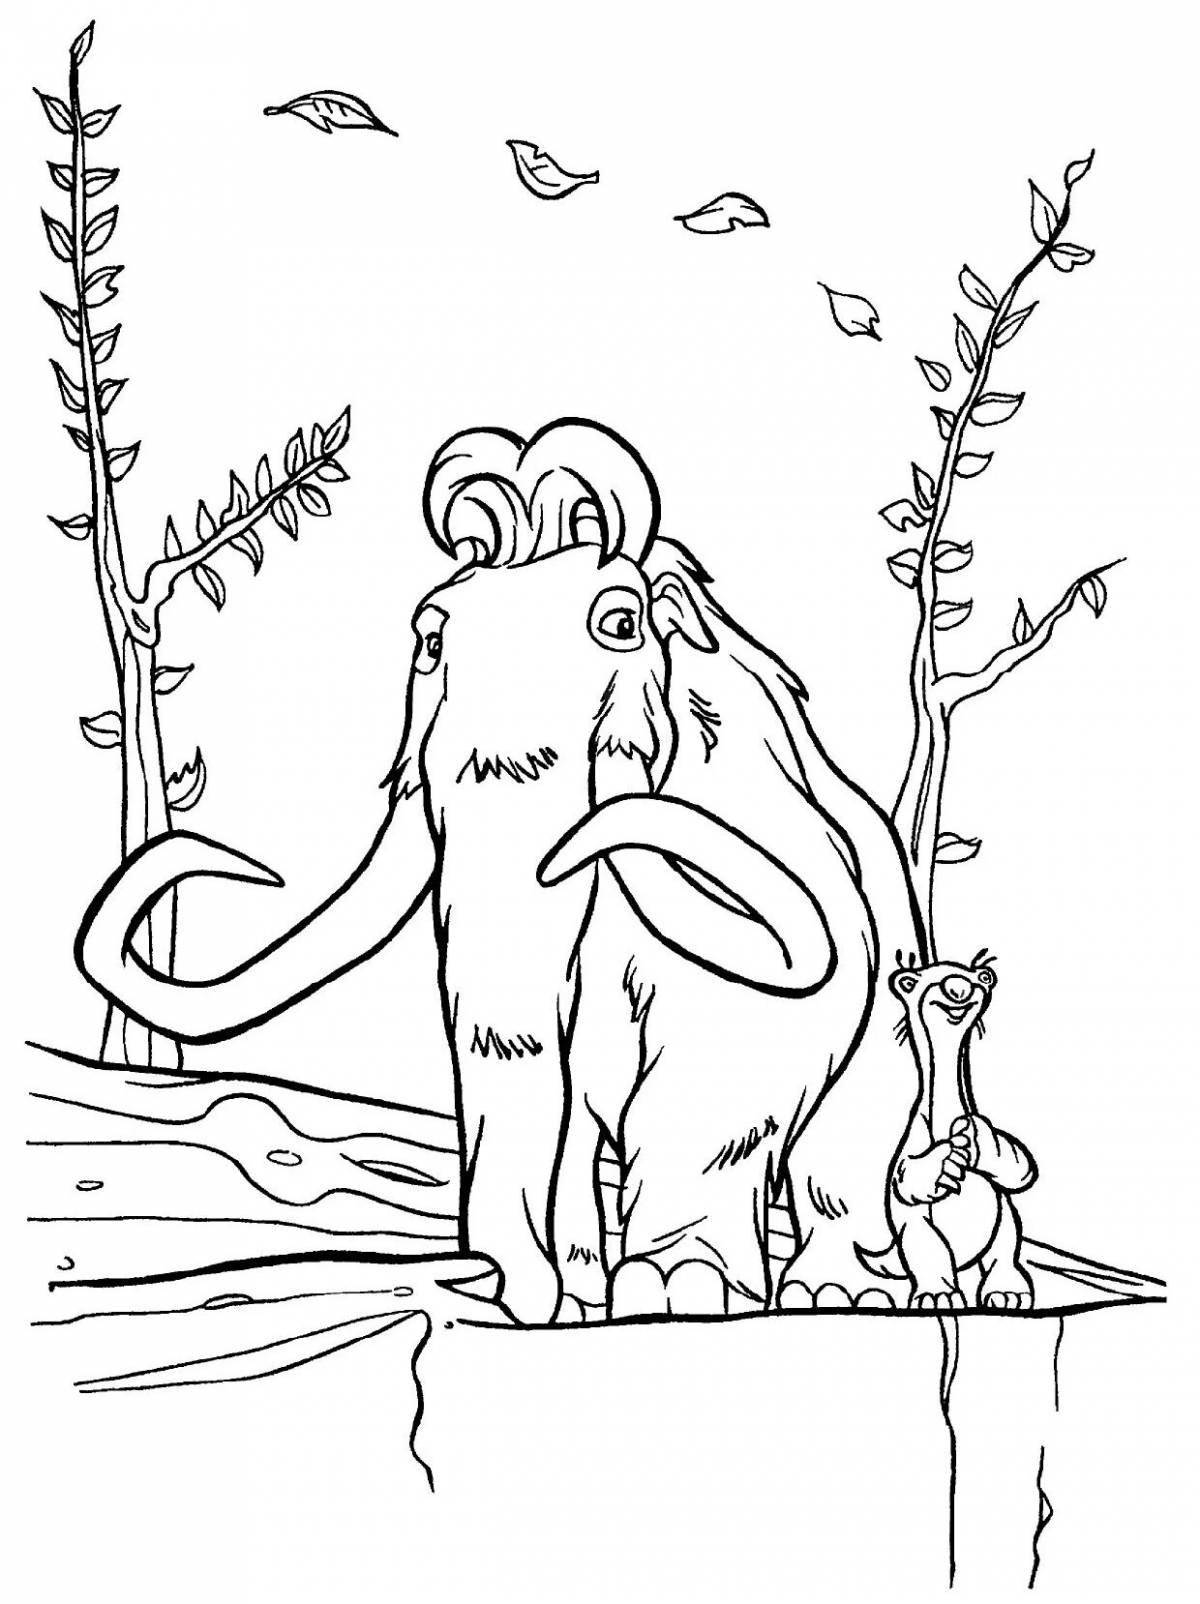 Ice Age 4 humorous coloring book